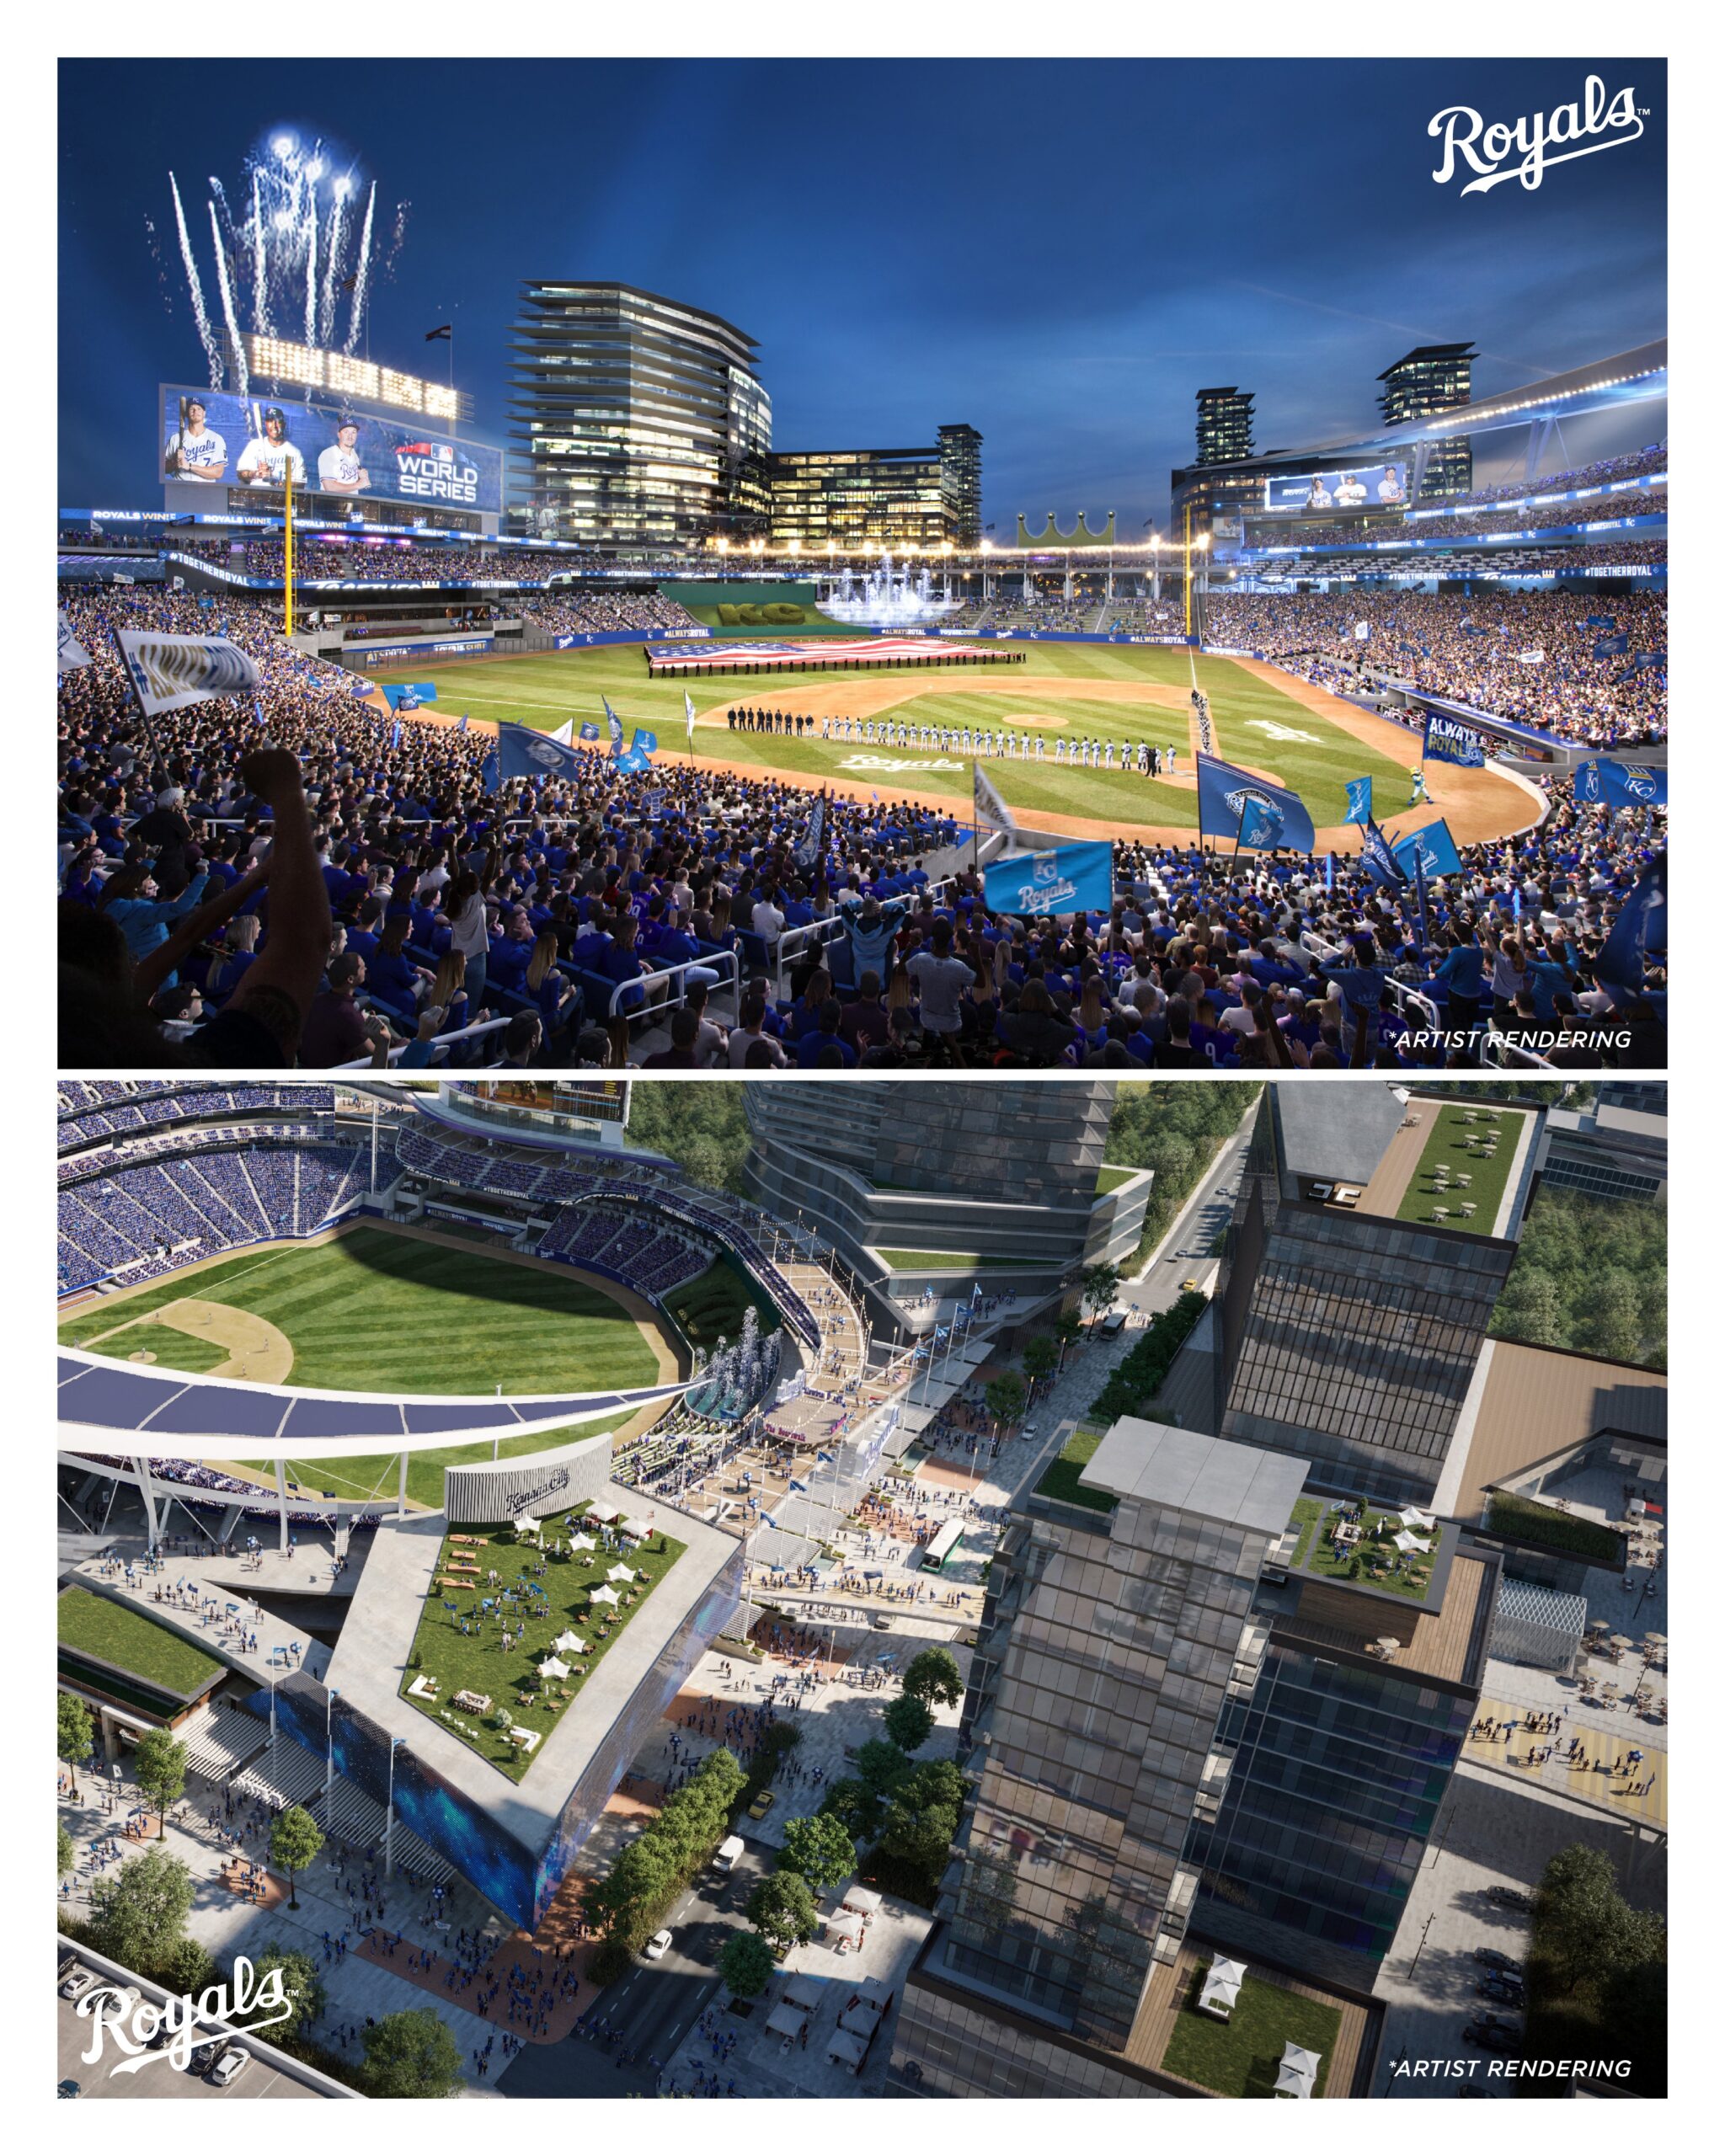 Economic impact at heart of debate for some on proposed Royals stadium